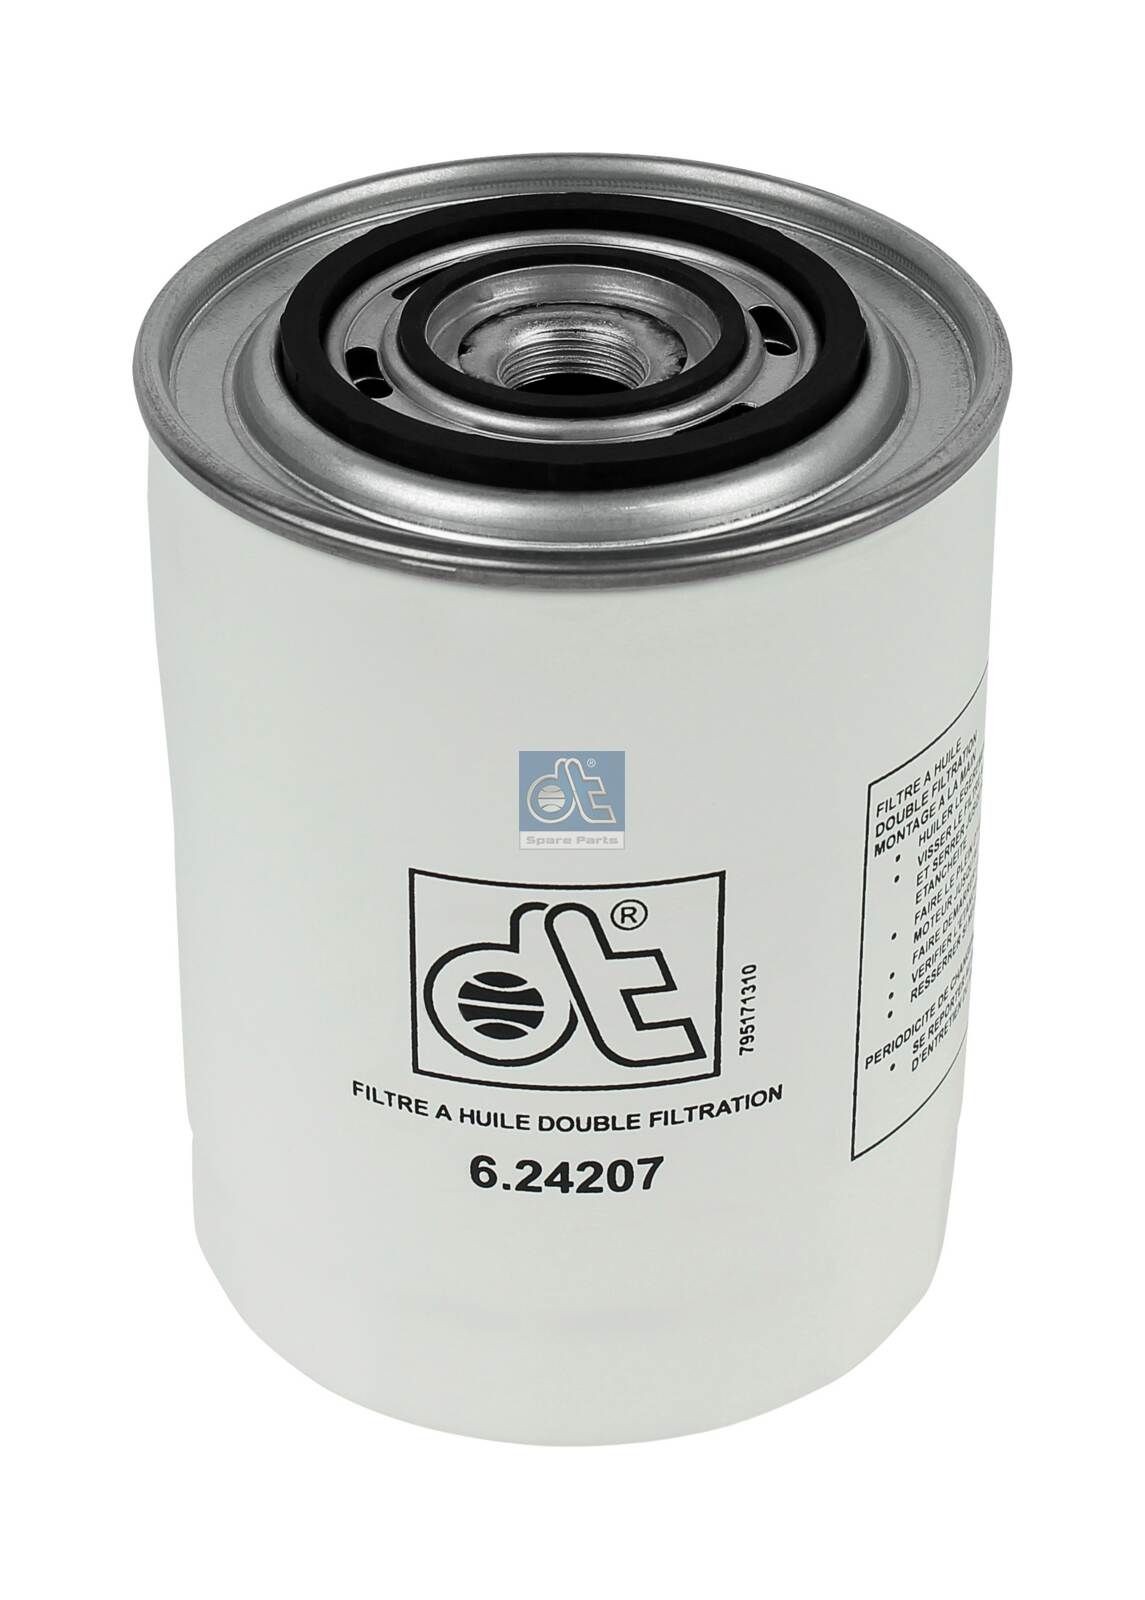 WP 1144 DT Spare Parts 6.24207 Oil filter 71739634